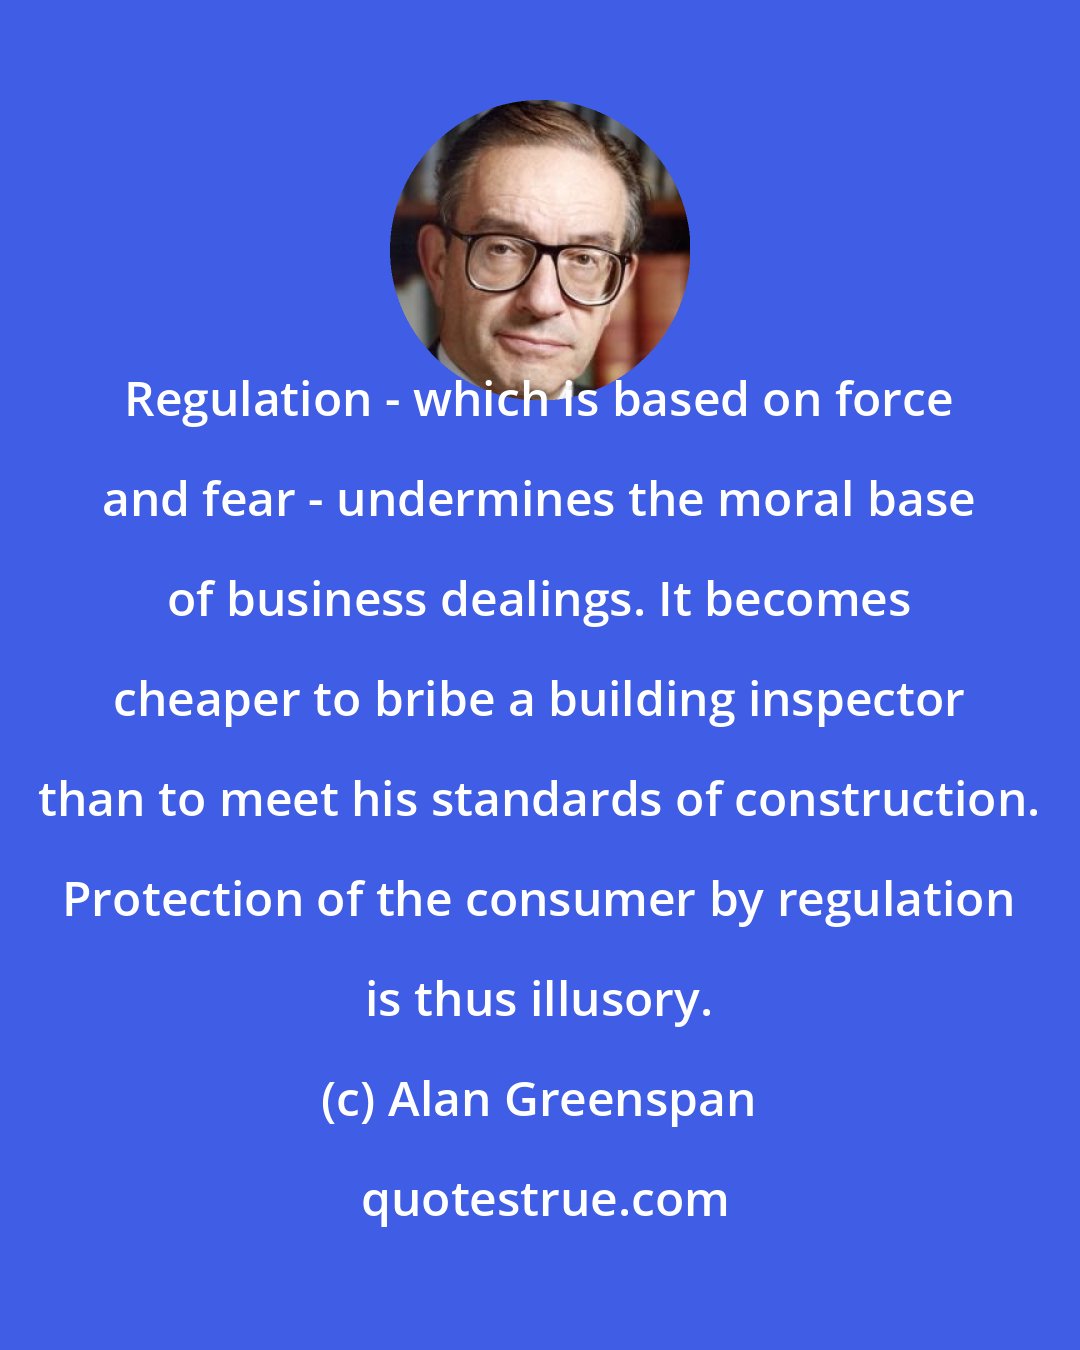 Alan Greenspan: Regulation - which is based on force and fear - undermines the moral base of business dealings. It becomes cheaper to bribe a building inspector than to meet his standards of construction. Protection of the consumer by regulation is thus illusory.